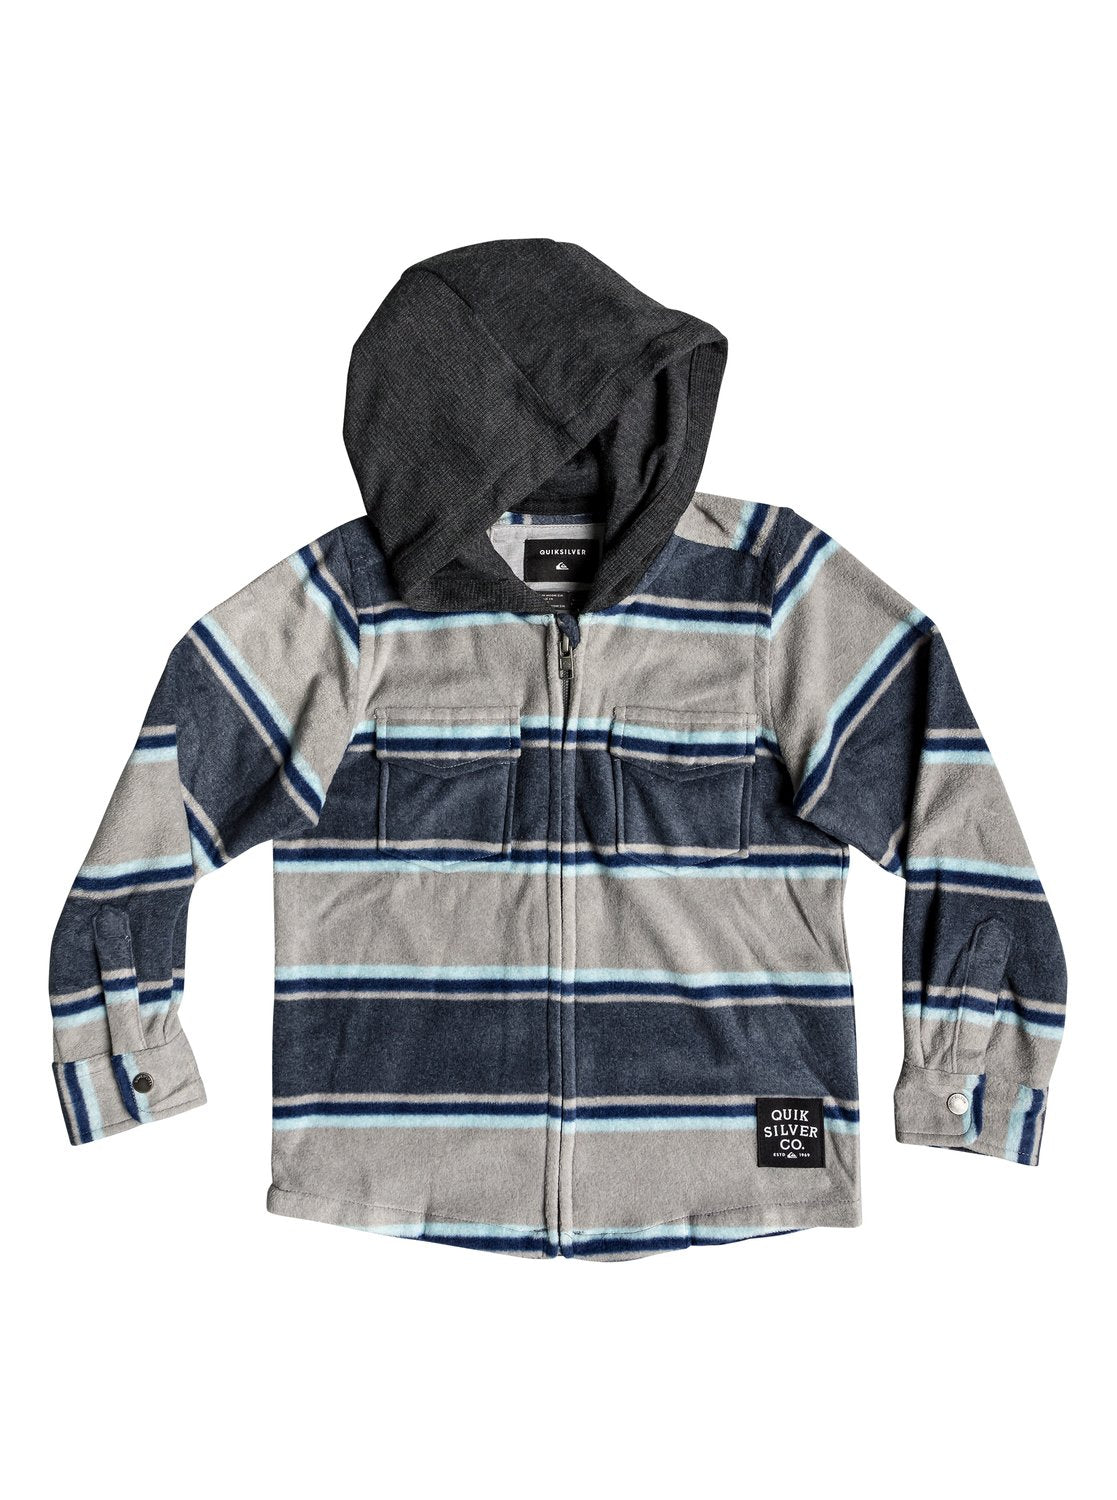 Quiksilver Surf Days Youth Jacket BST3 7